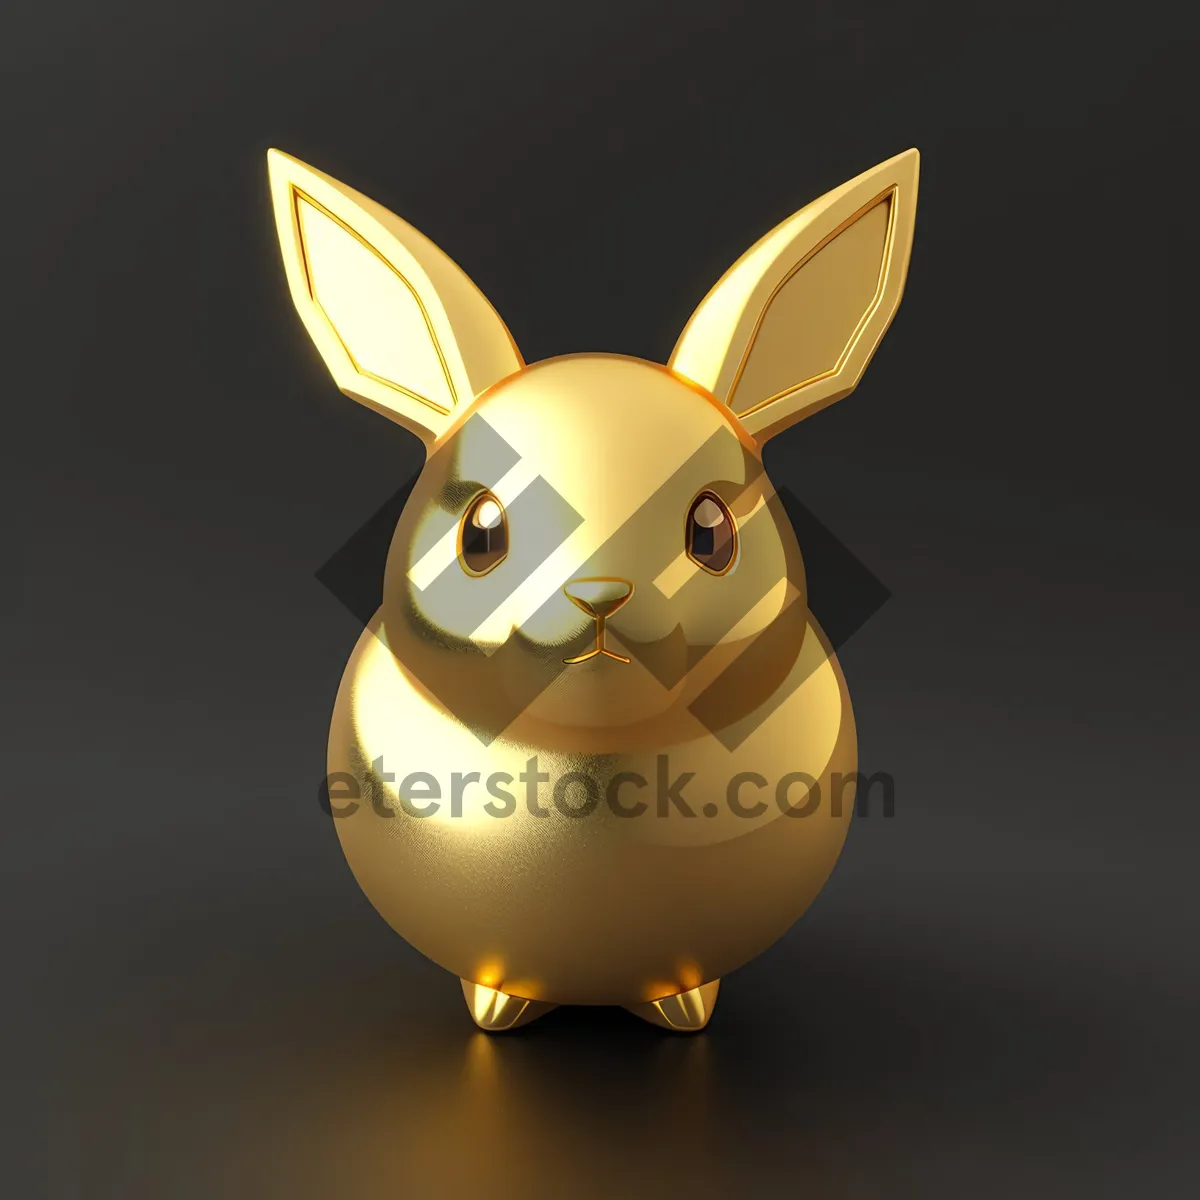 Picture of Cartoon Hen with Bunny Ears: A Whimsical Piggy Bank Icon